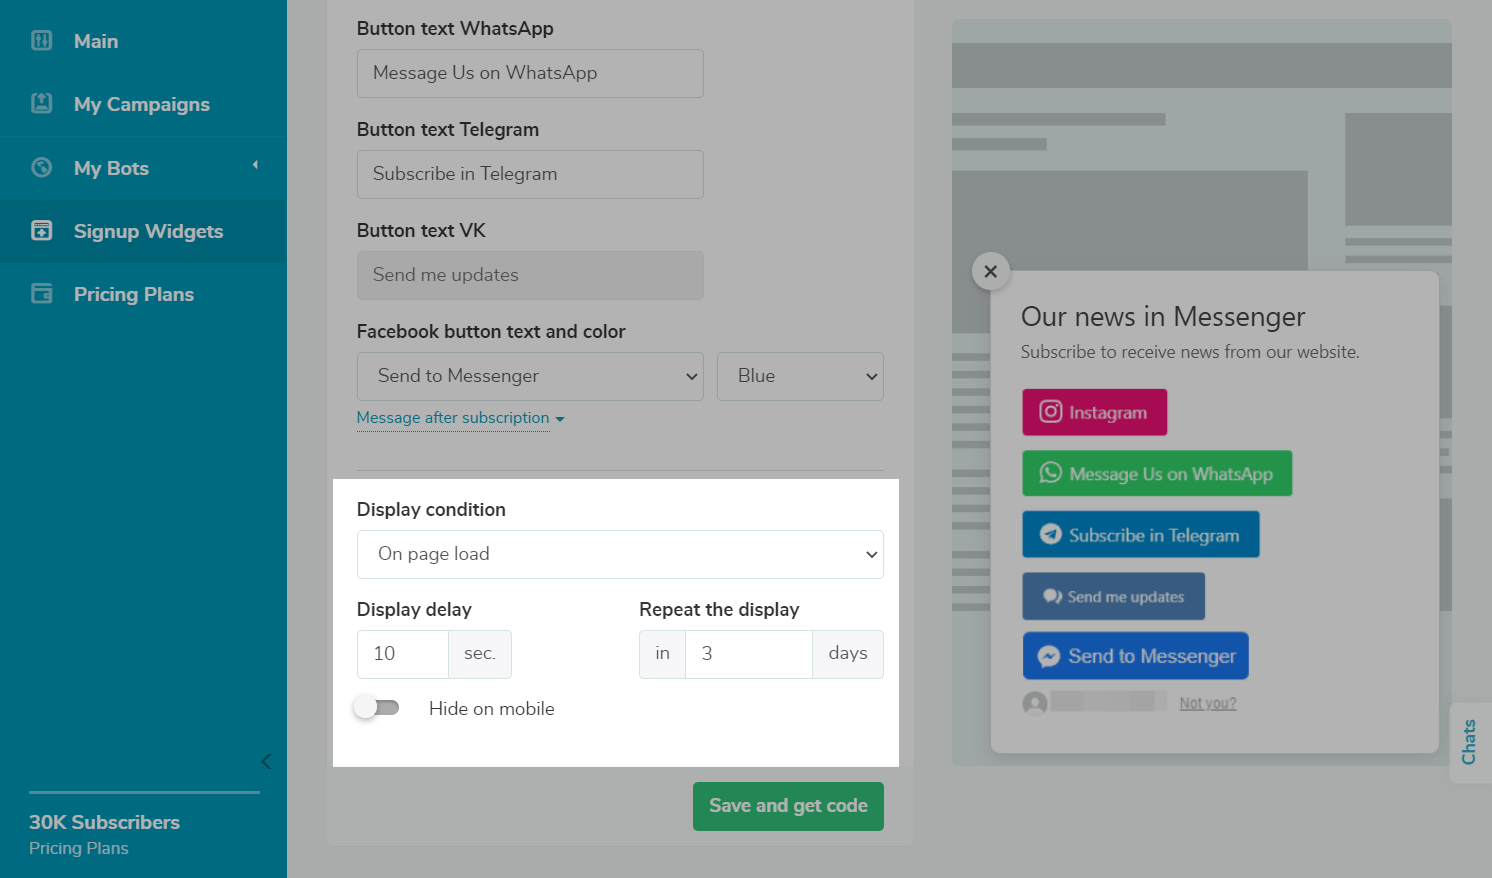 Settings for a floating form